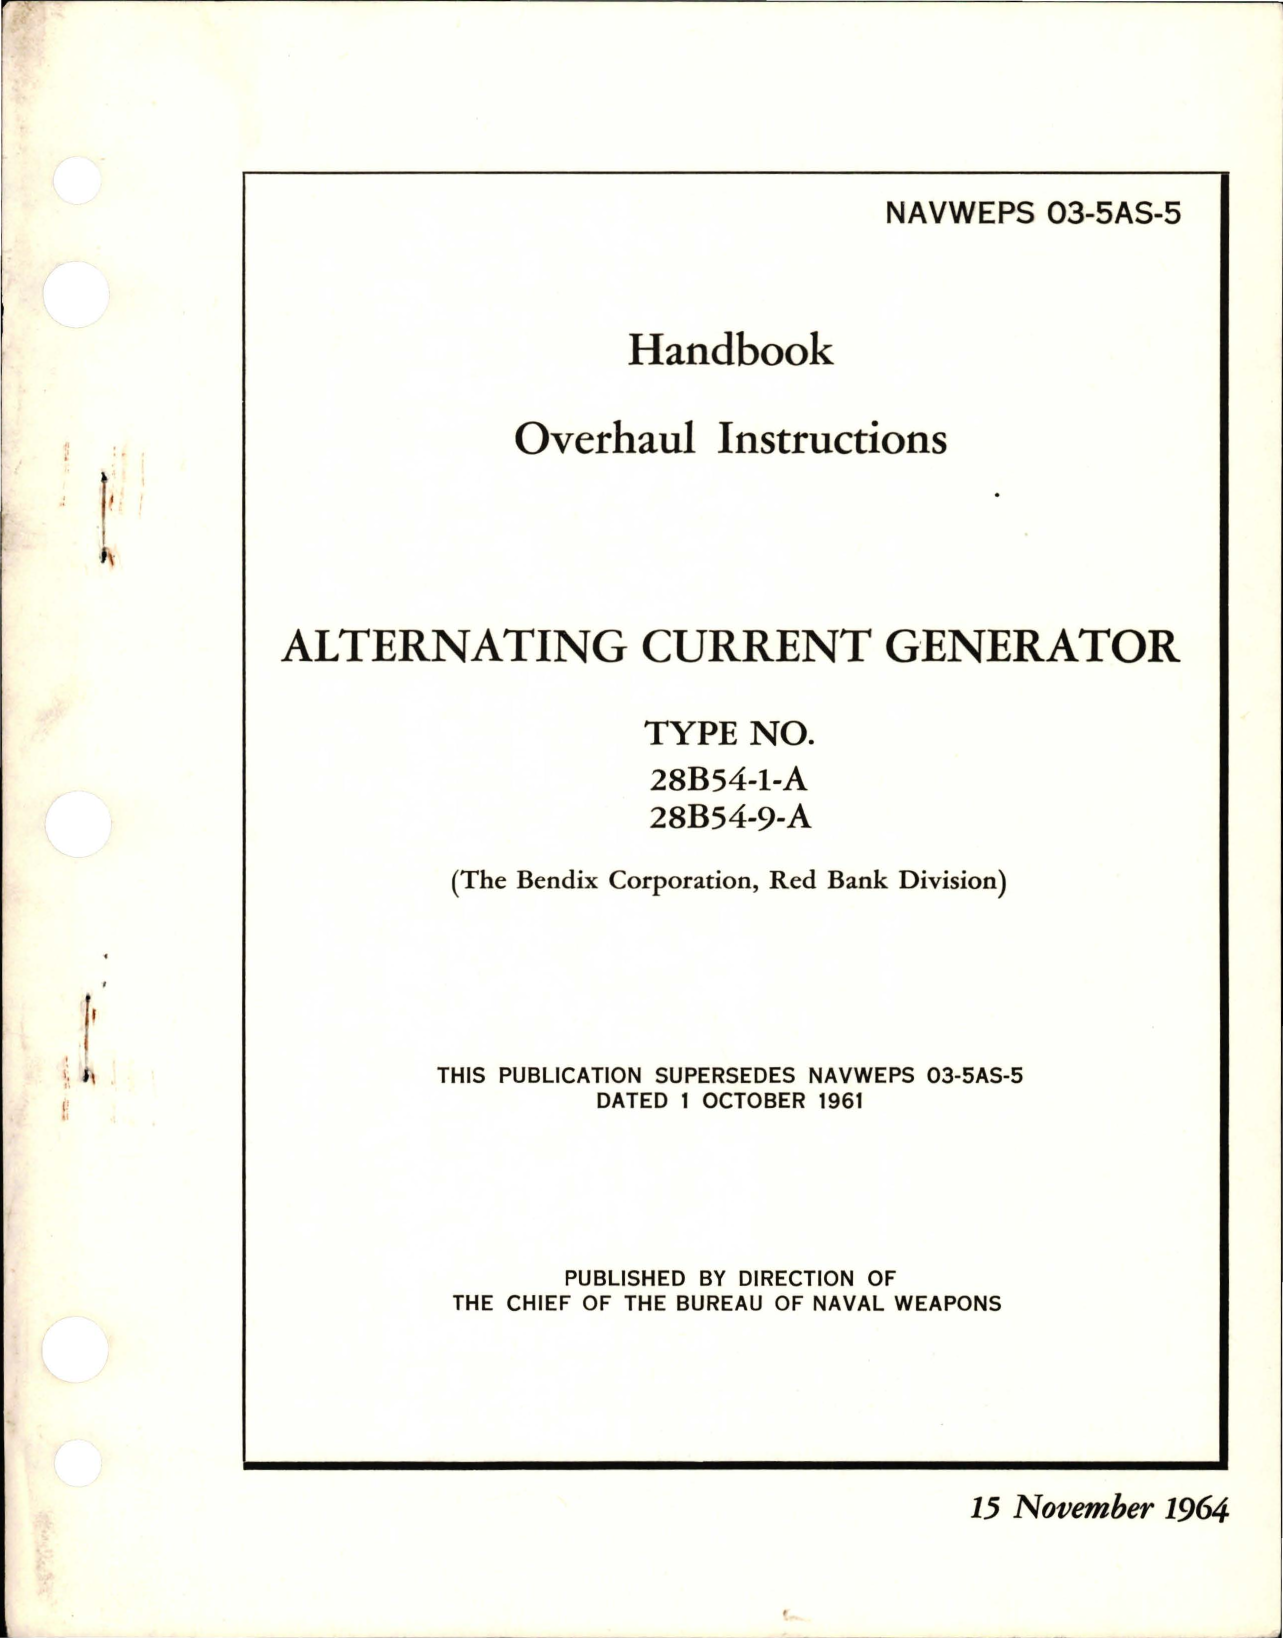 Sample page 1 from AirCorps Library document: Overhaul Instructions for Alternating Current Generator - Type 28B54-1-A and 28B54-9-A